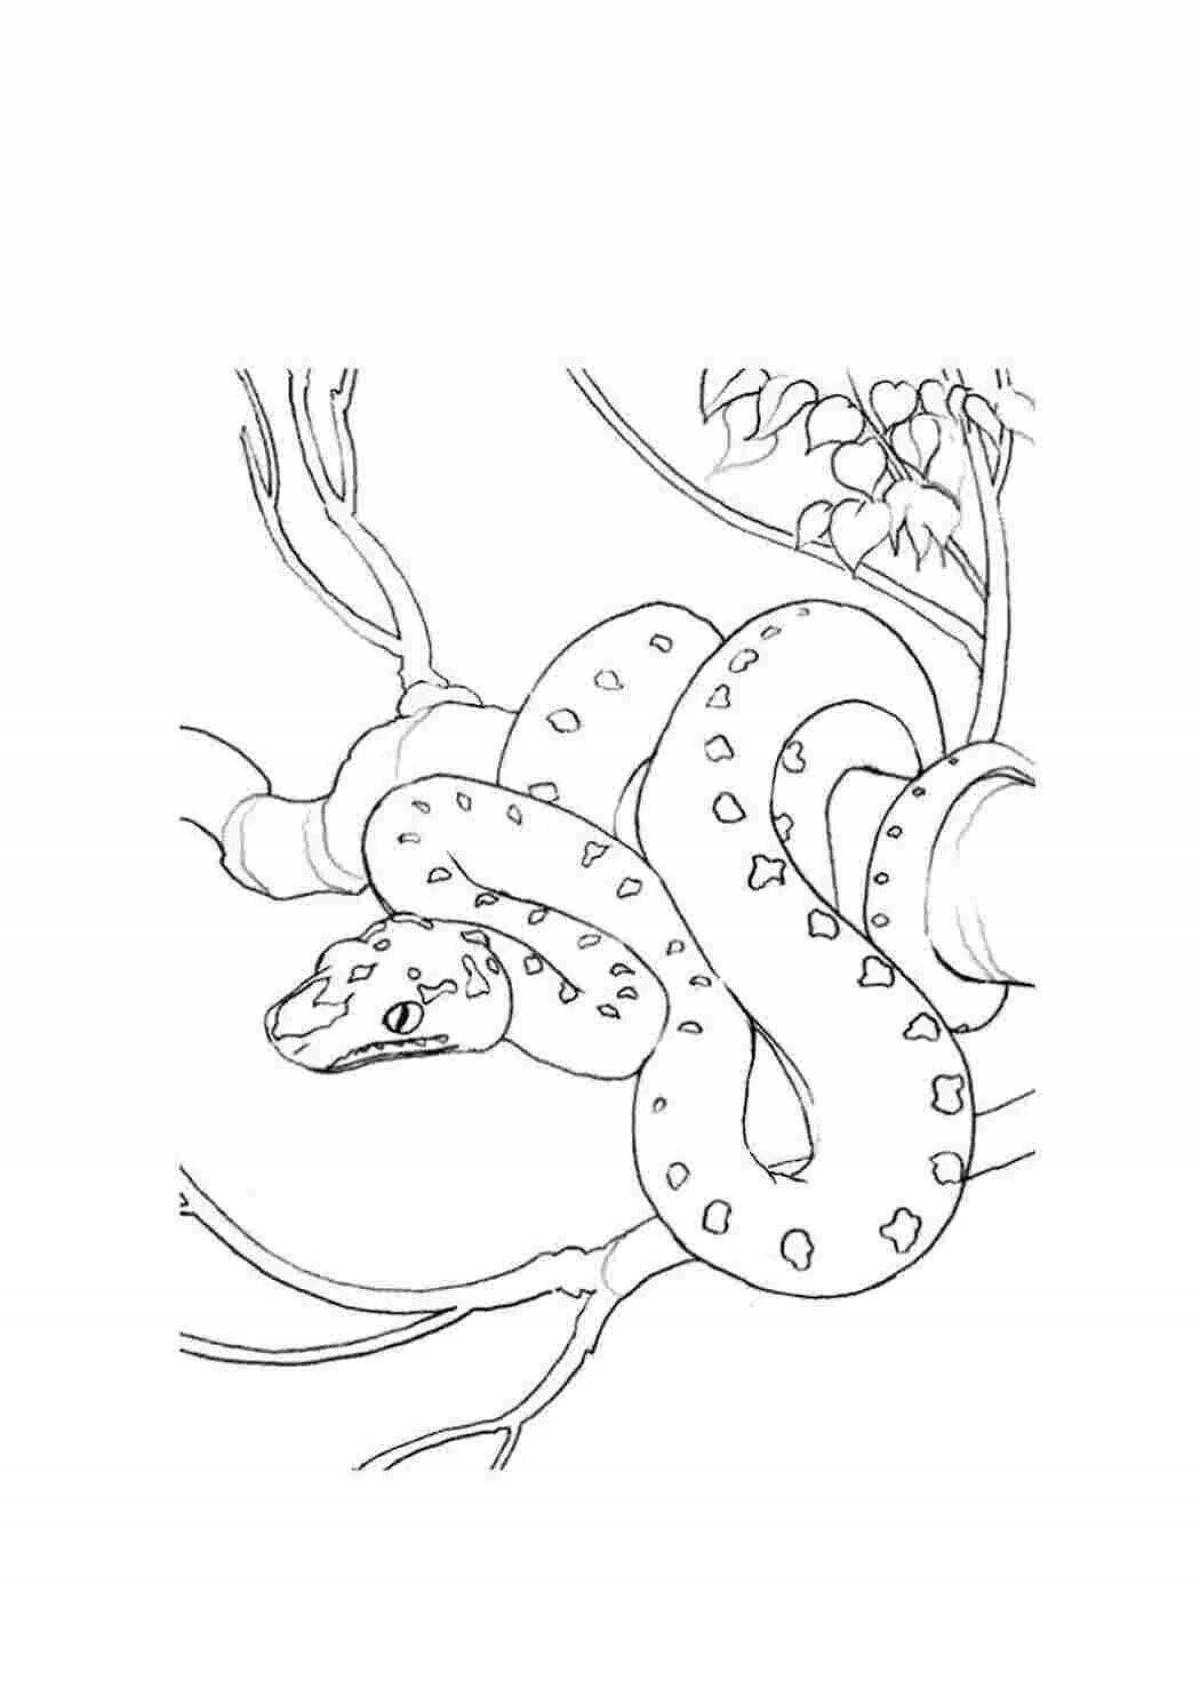 Coloring page nice budge blue snake